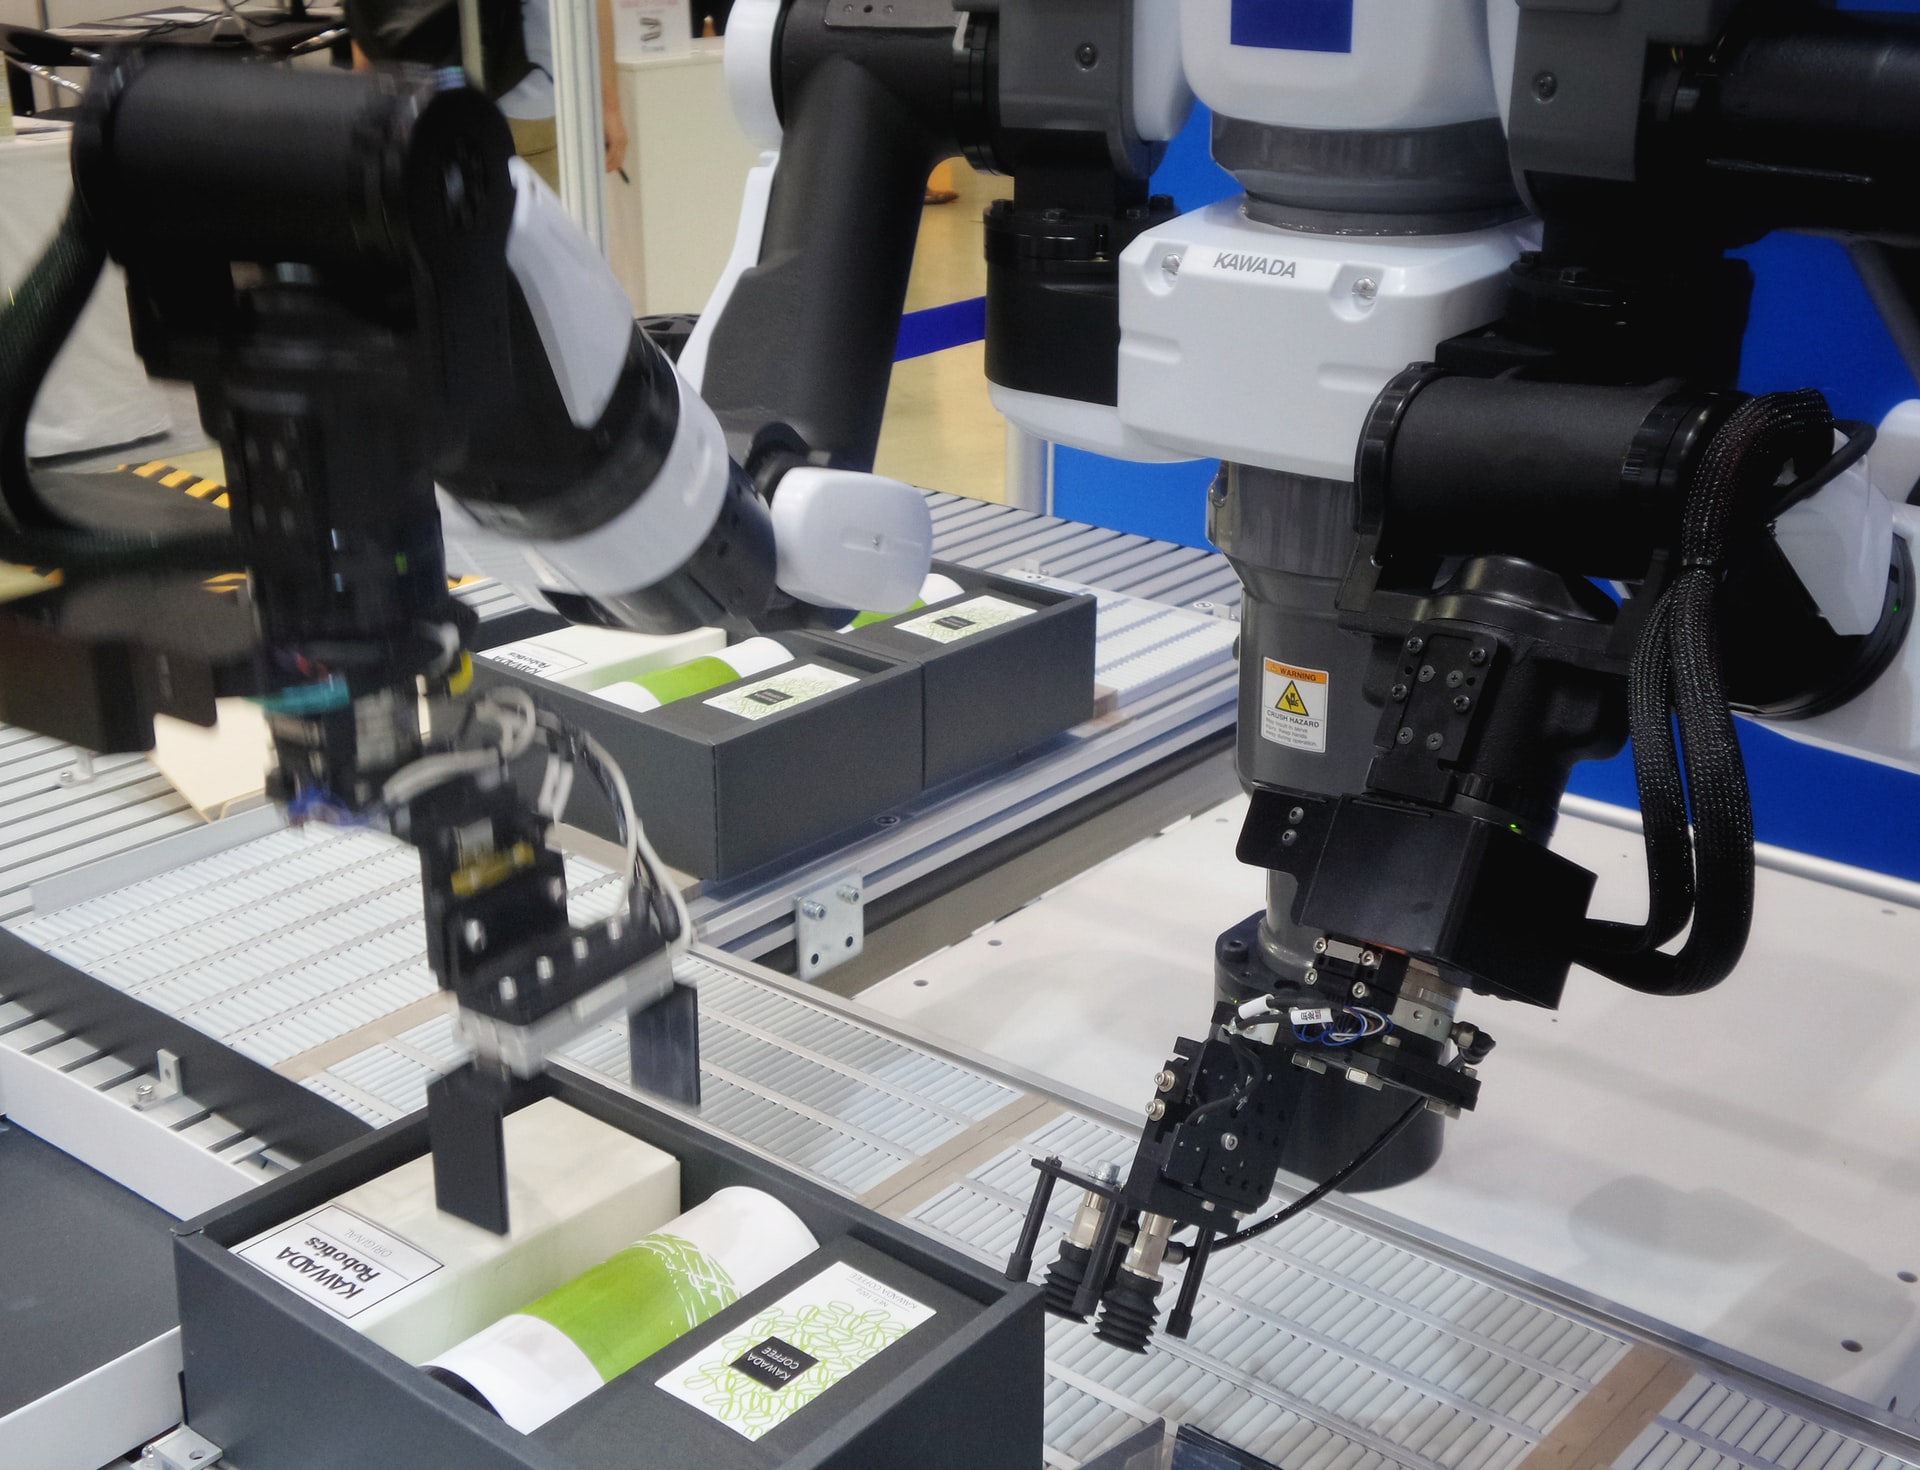 Enabling human interaction with industrial robots